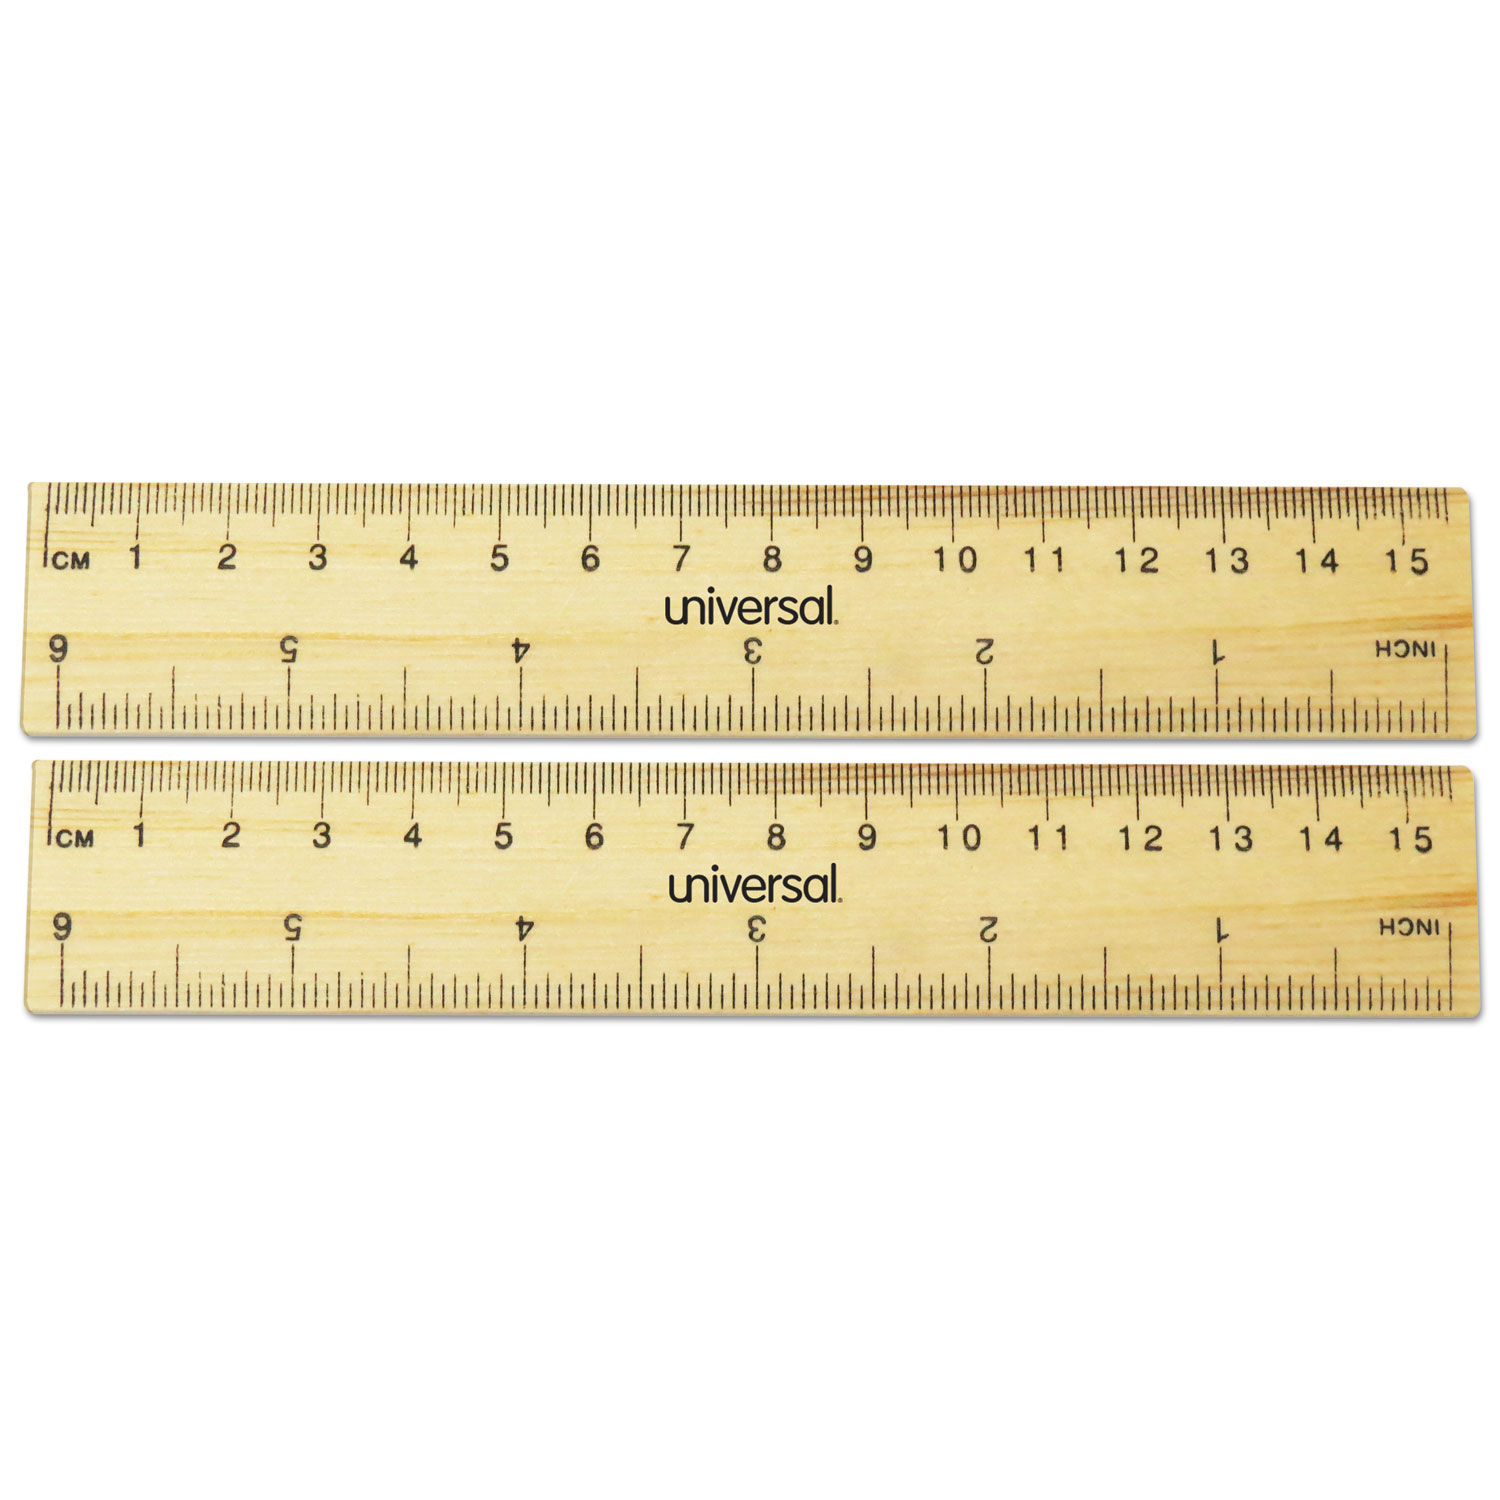 Uxcell Whiteboard Magnetic Ruler 29cm Metric Blackboard Straight Rulers  Office Measuring Tools, Yellow